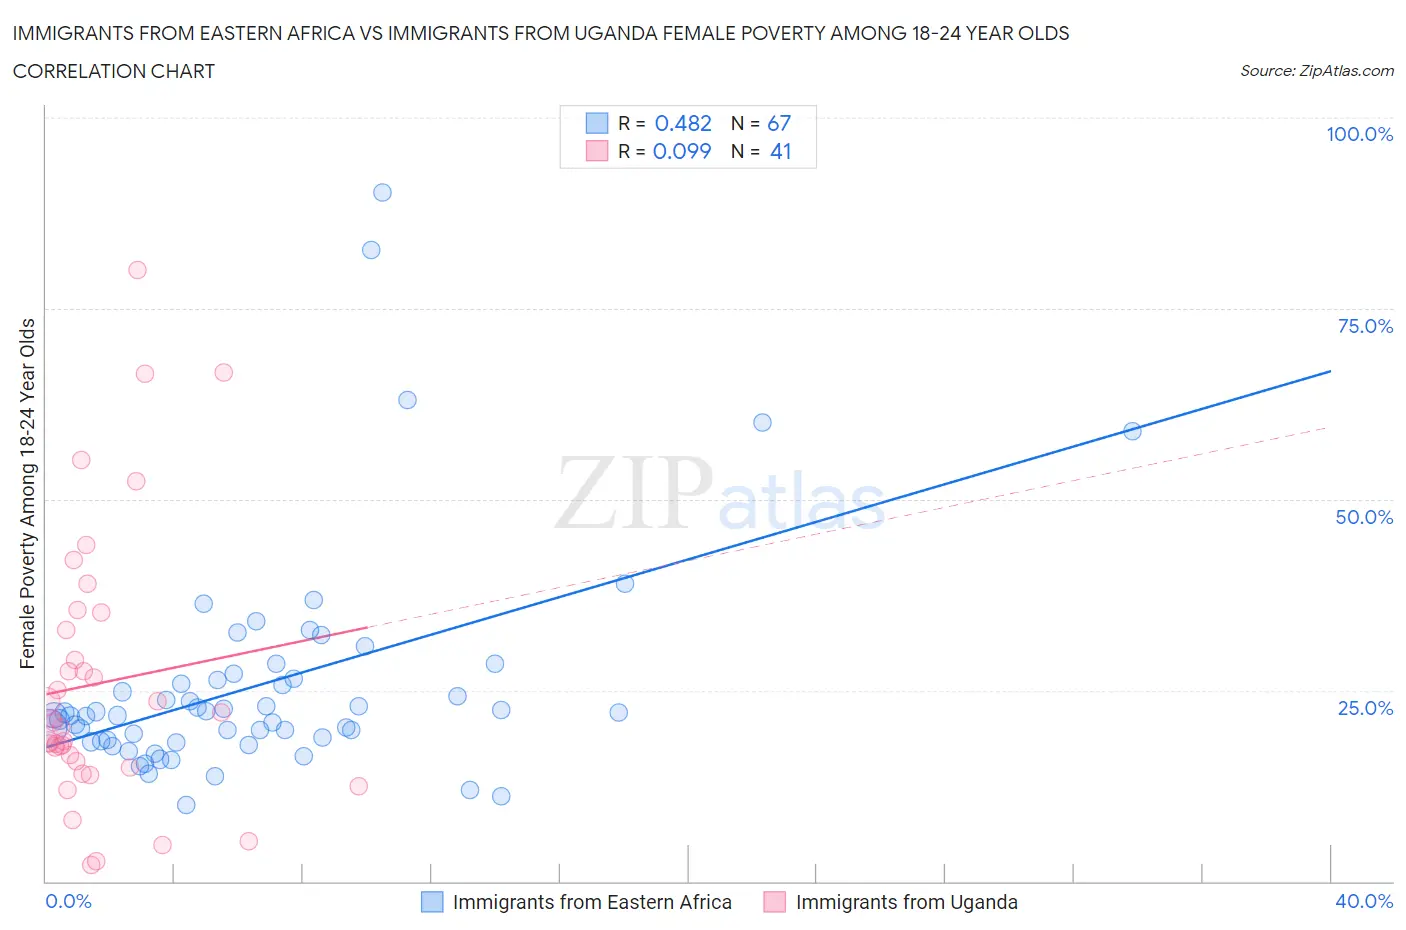 Immigrants from Eastern Africa vs Immigrants from Uganda Female Poverty Among 18-24 Year Olds